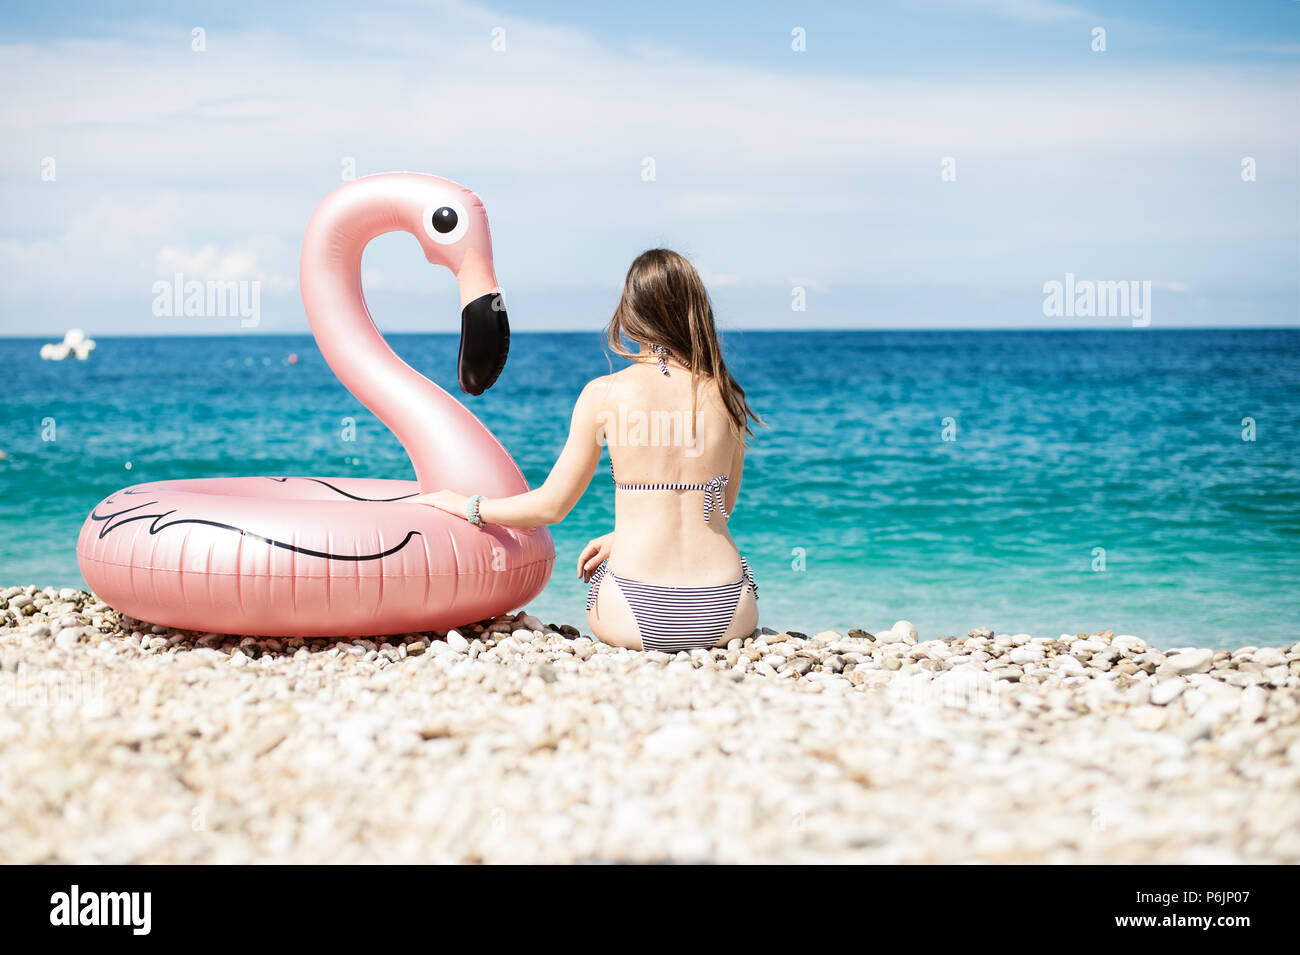 Young woman with bikini sitting close to giant inflated flamingo on a beach with turquois water of Ionian Sea Albania Stock Photo